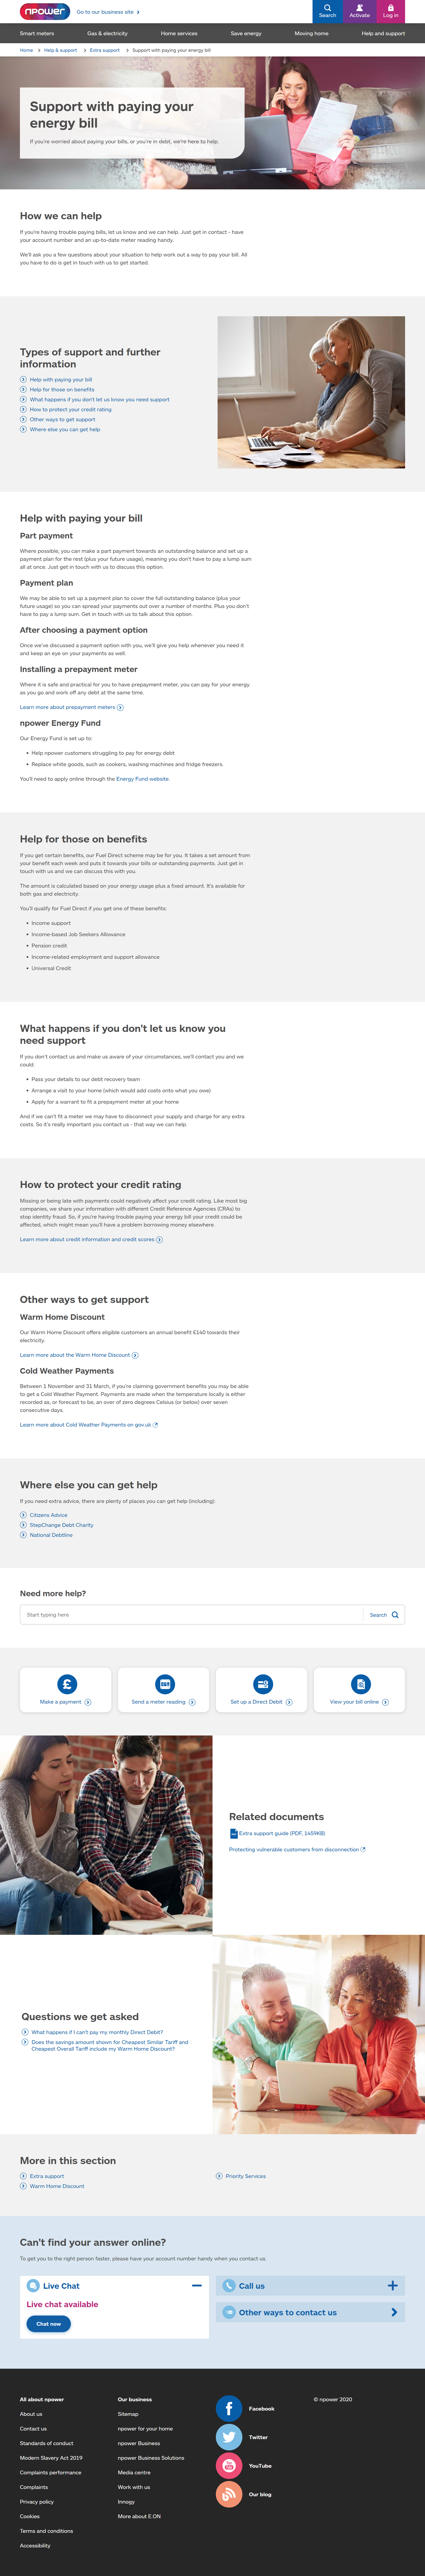 Screenshot of npower Support for paying your energy bill page